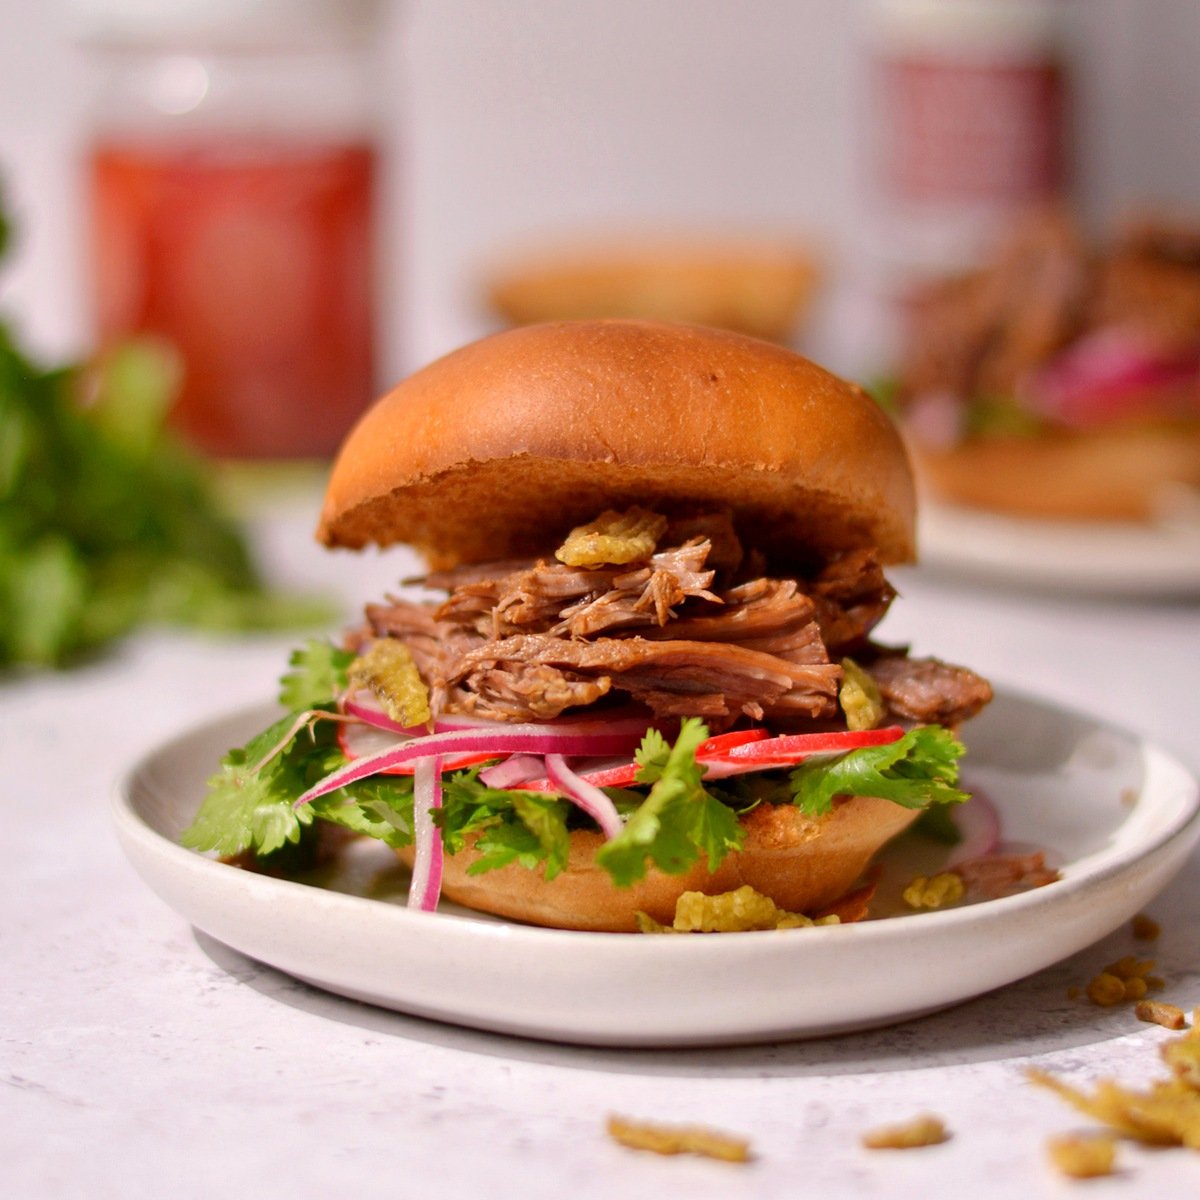 A pulled beef burger with leafy greens, red onions, and radishes on top.